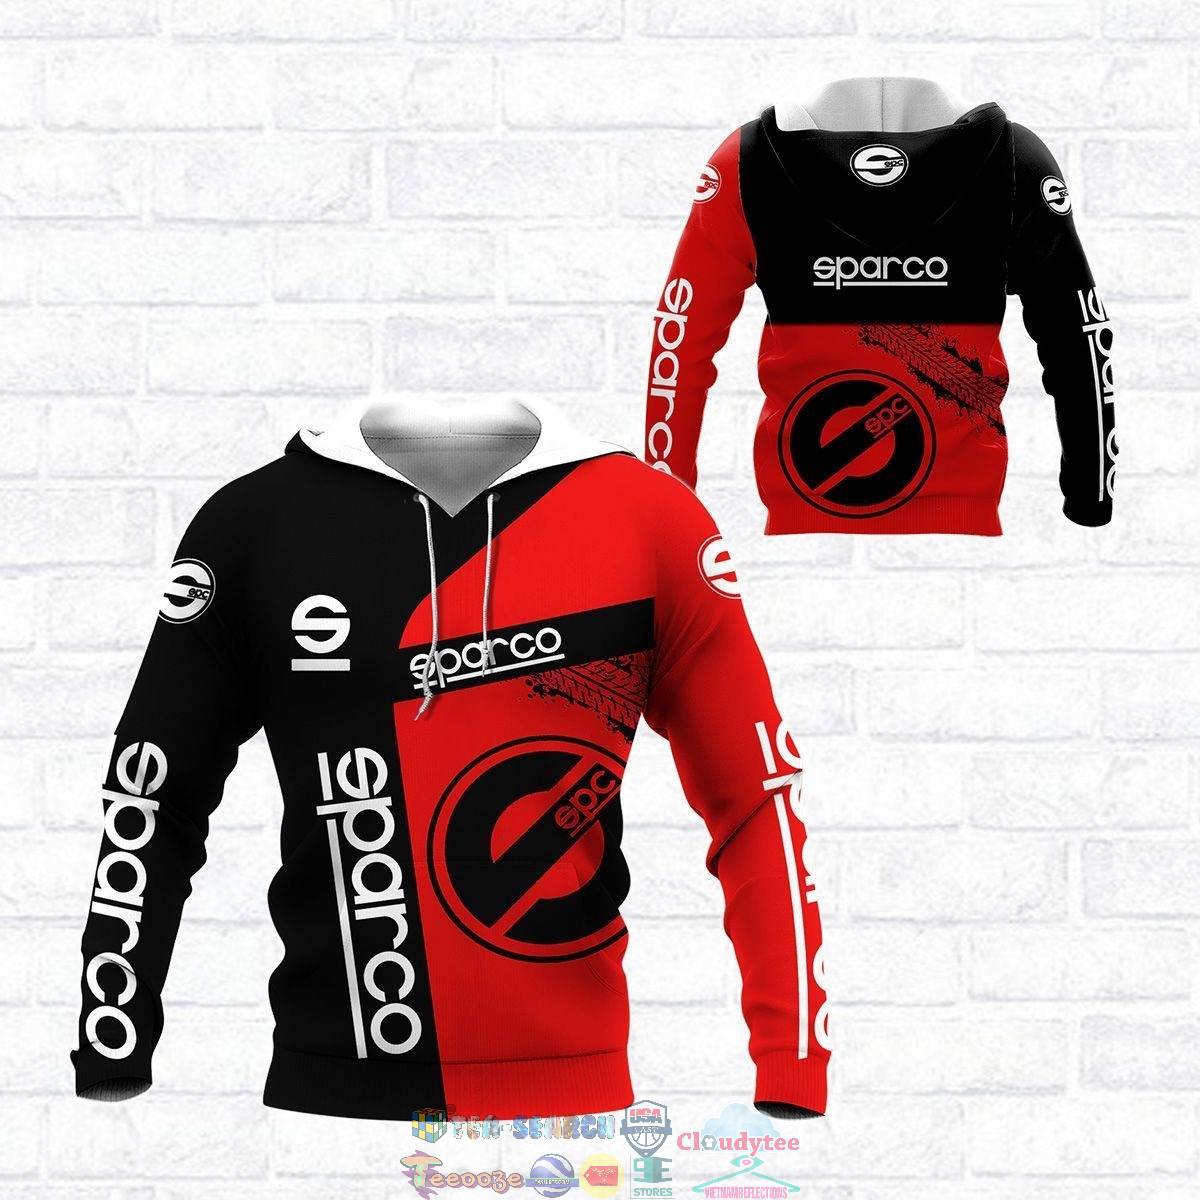 Sparco ver 2 3D hoodie and t-shirt – Saleoff